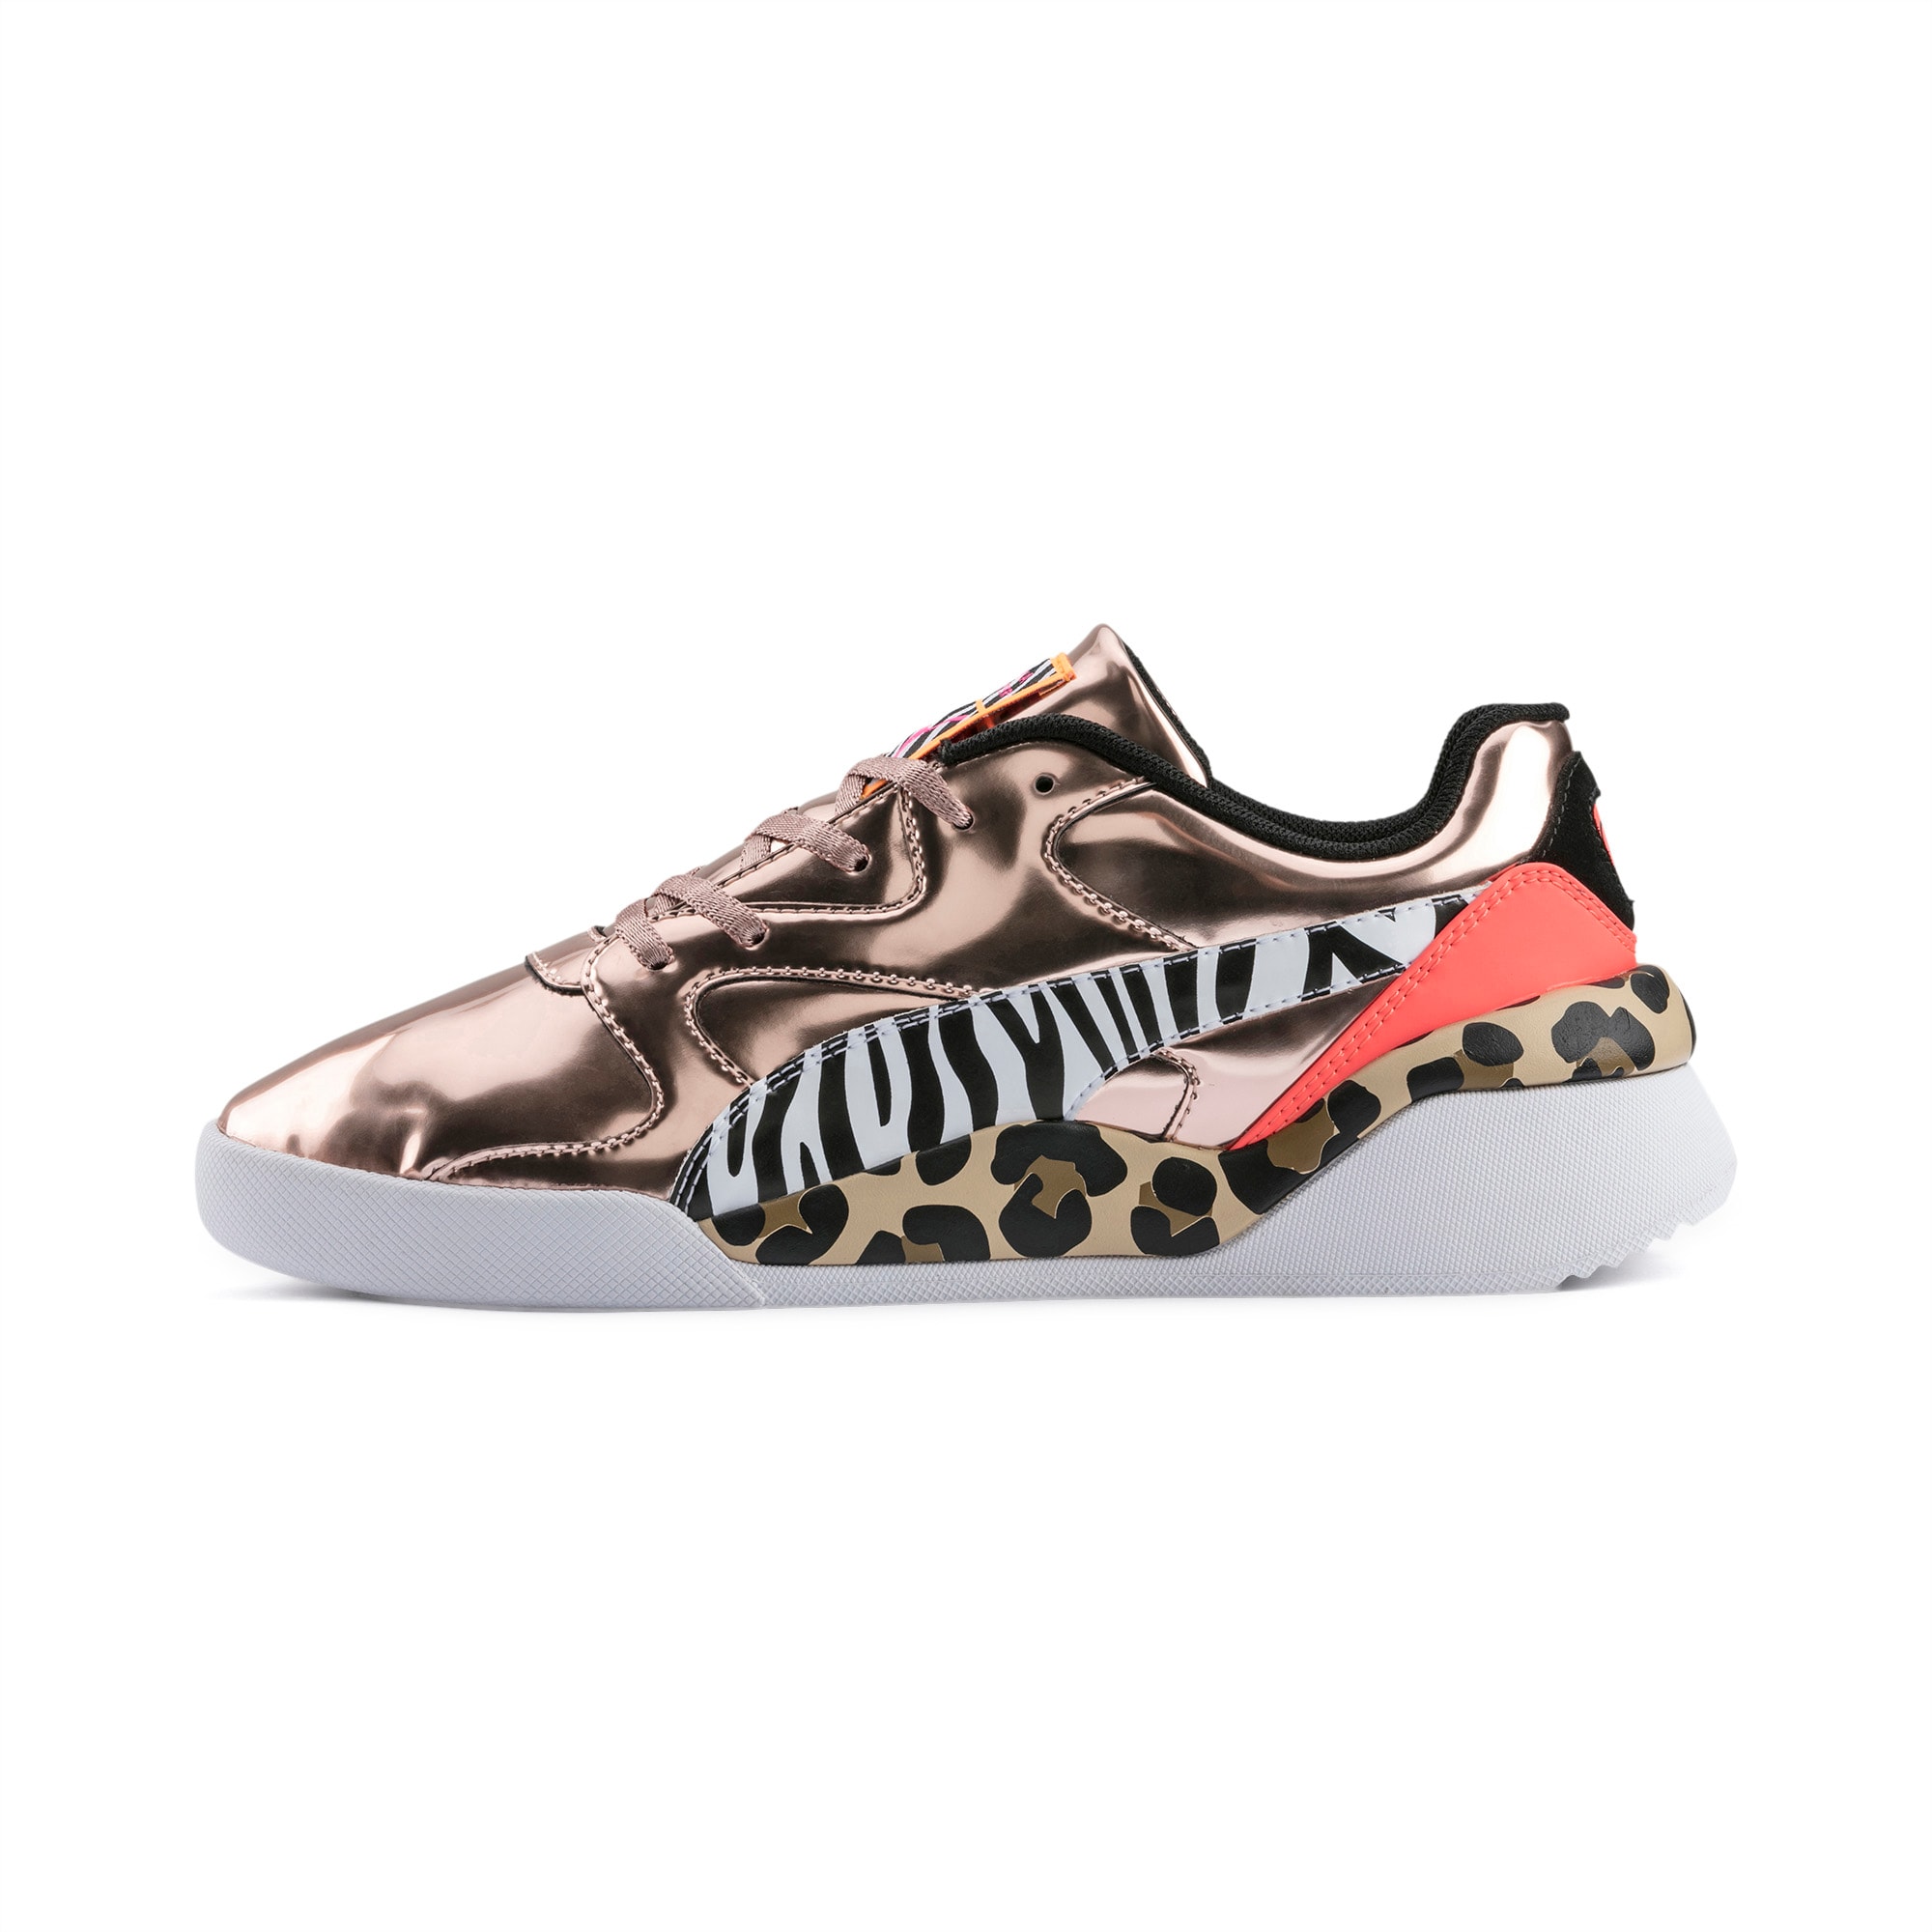 puma sophia webster collection